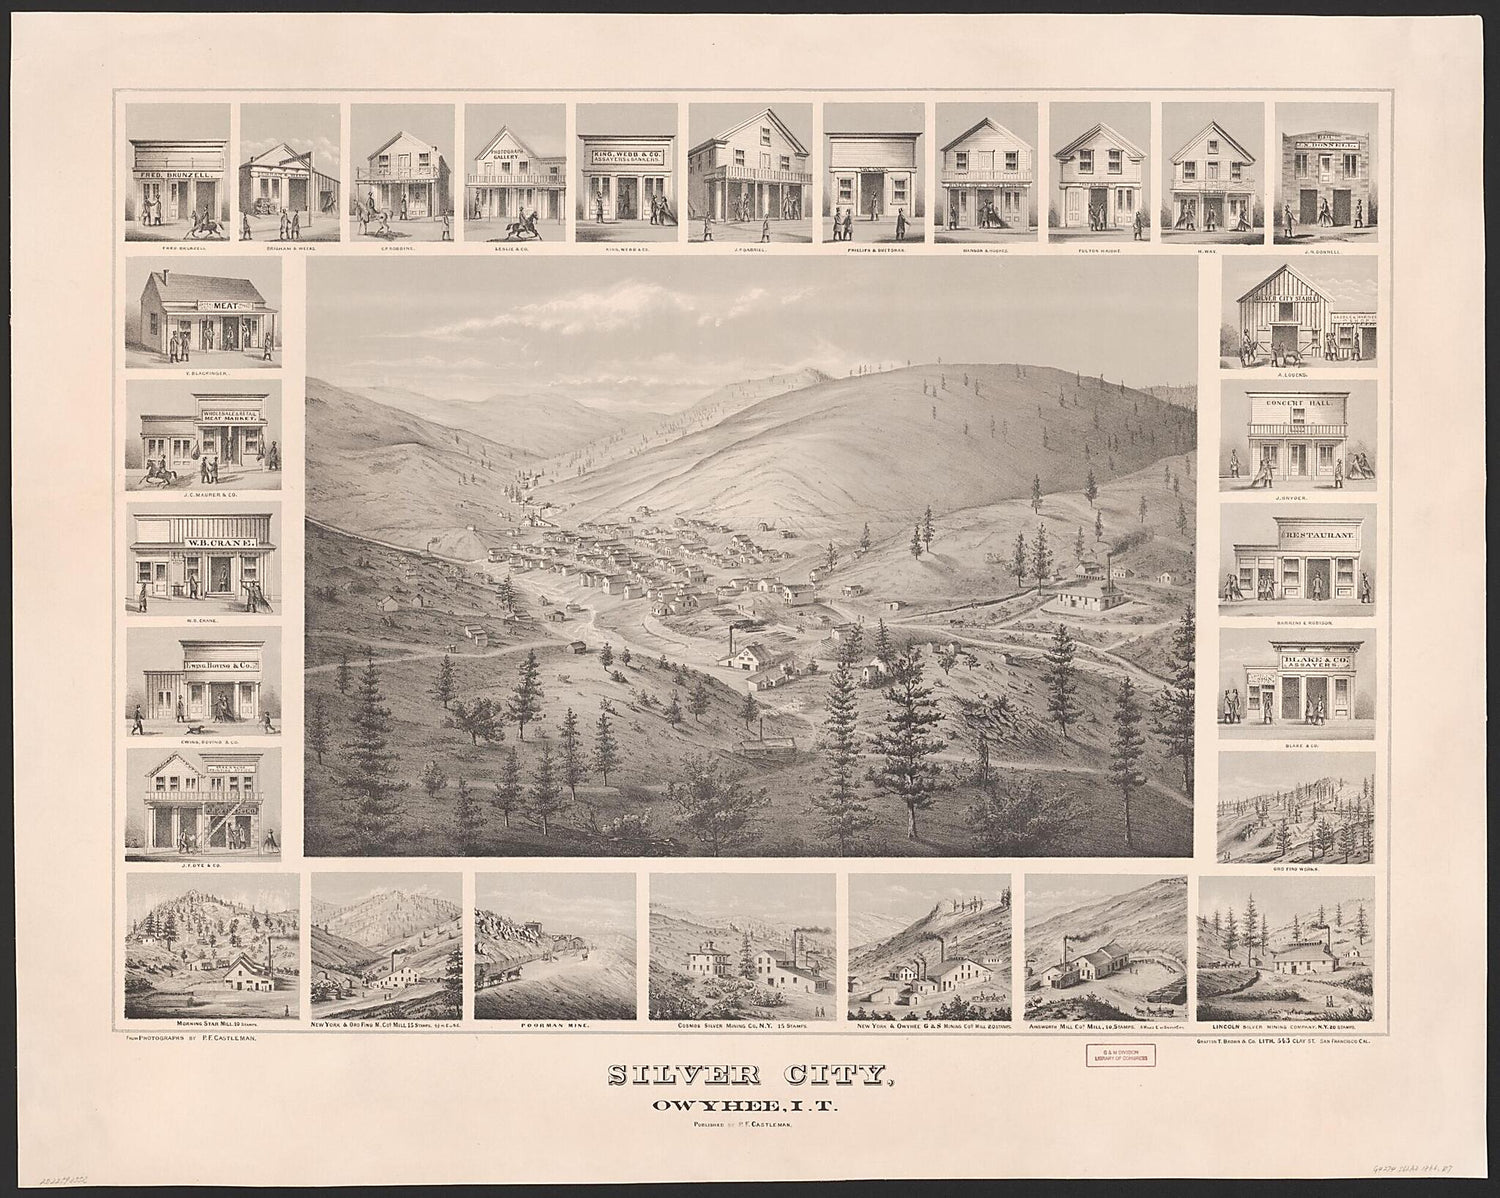 This old map of Silver City, Owyhee, I.T from 1866 was created by Grafton Tyler Brown, P. F. (Philip F.) Castleman in 1866